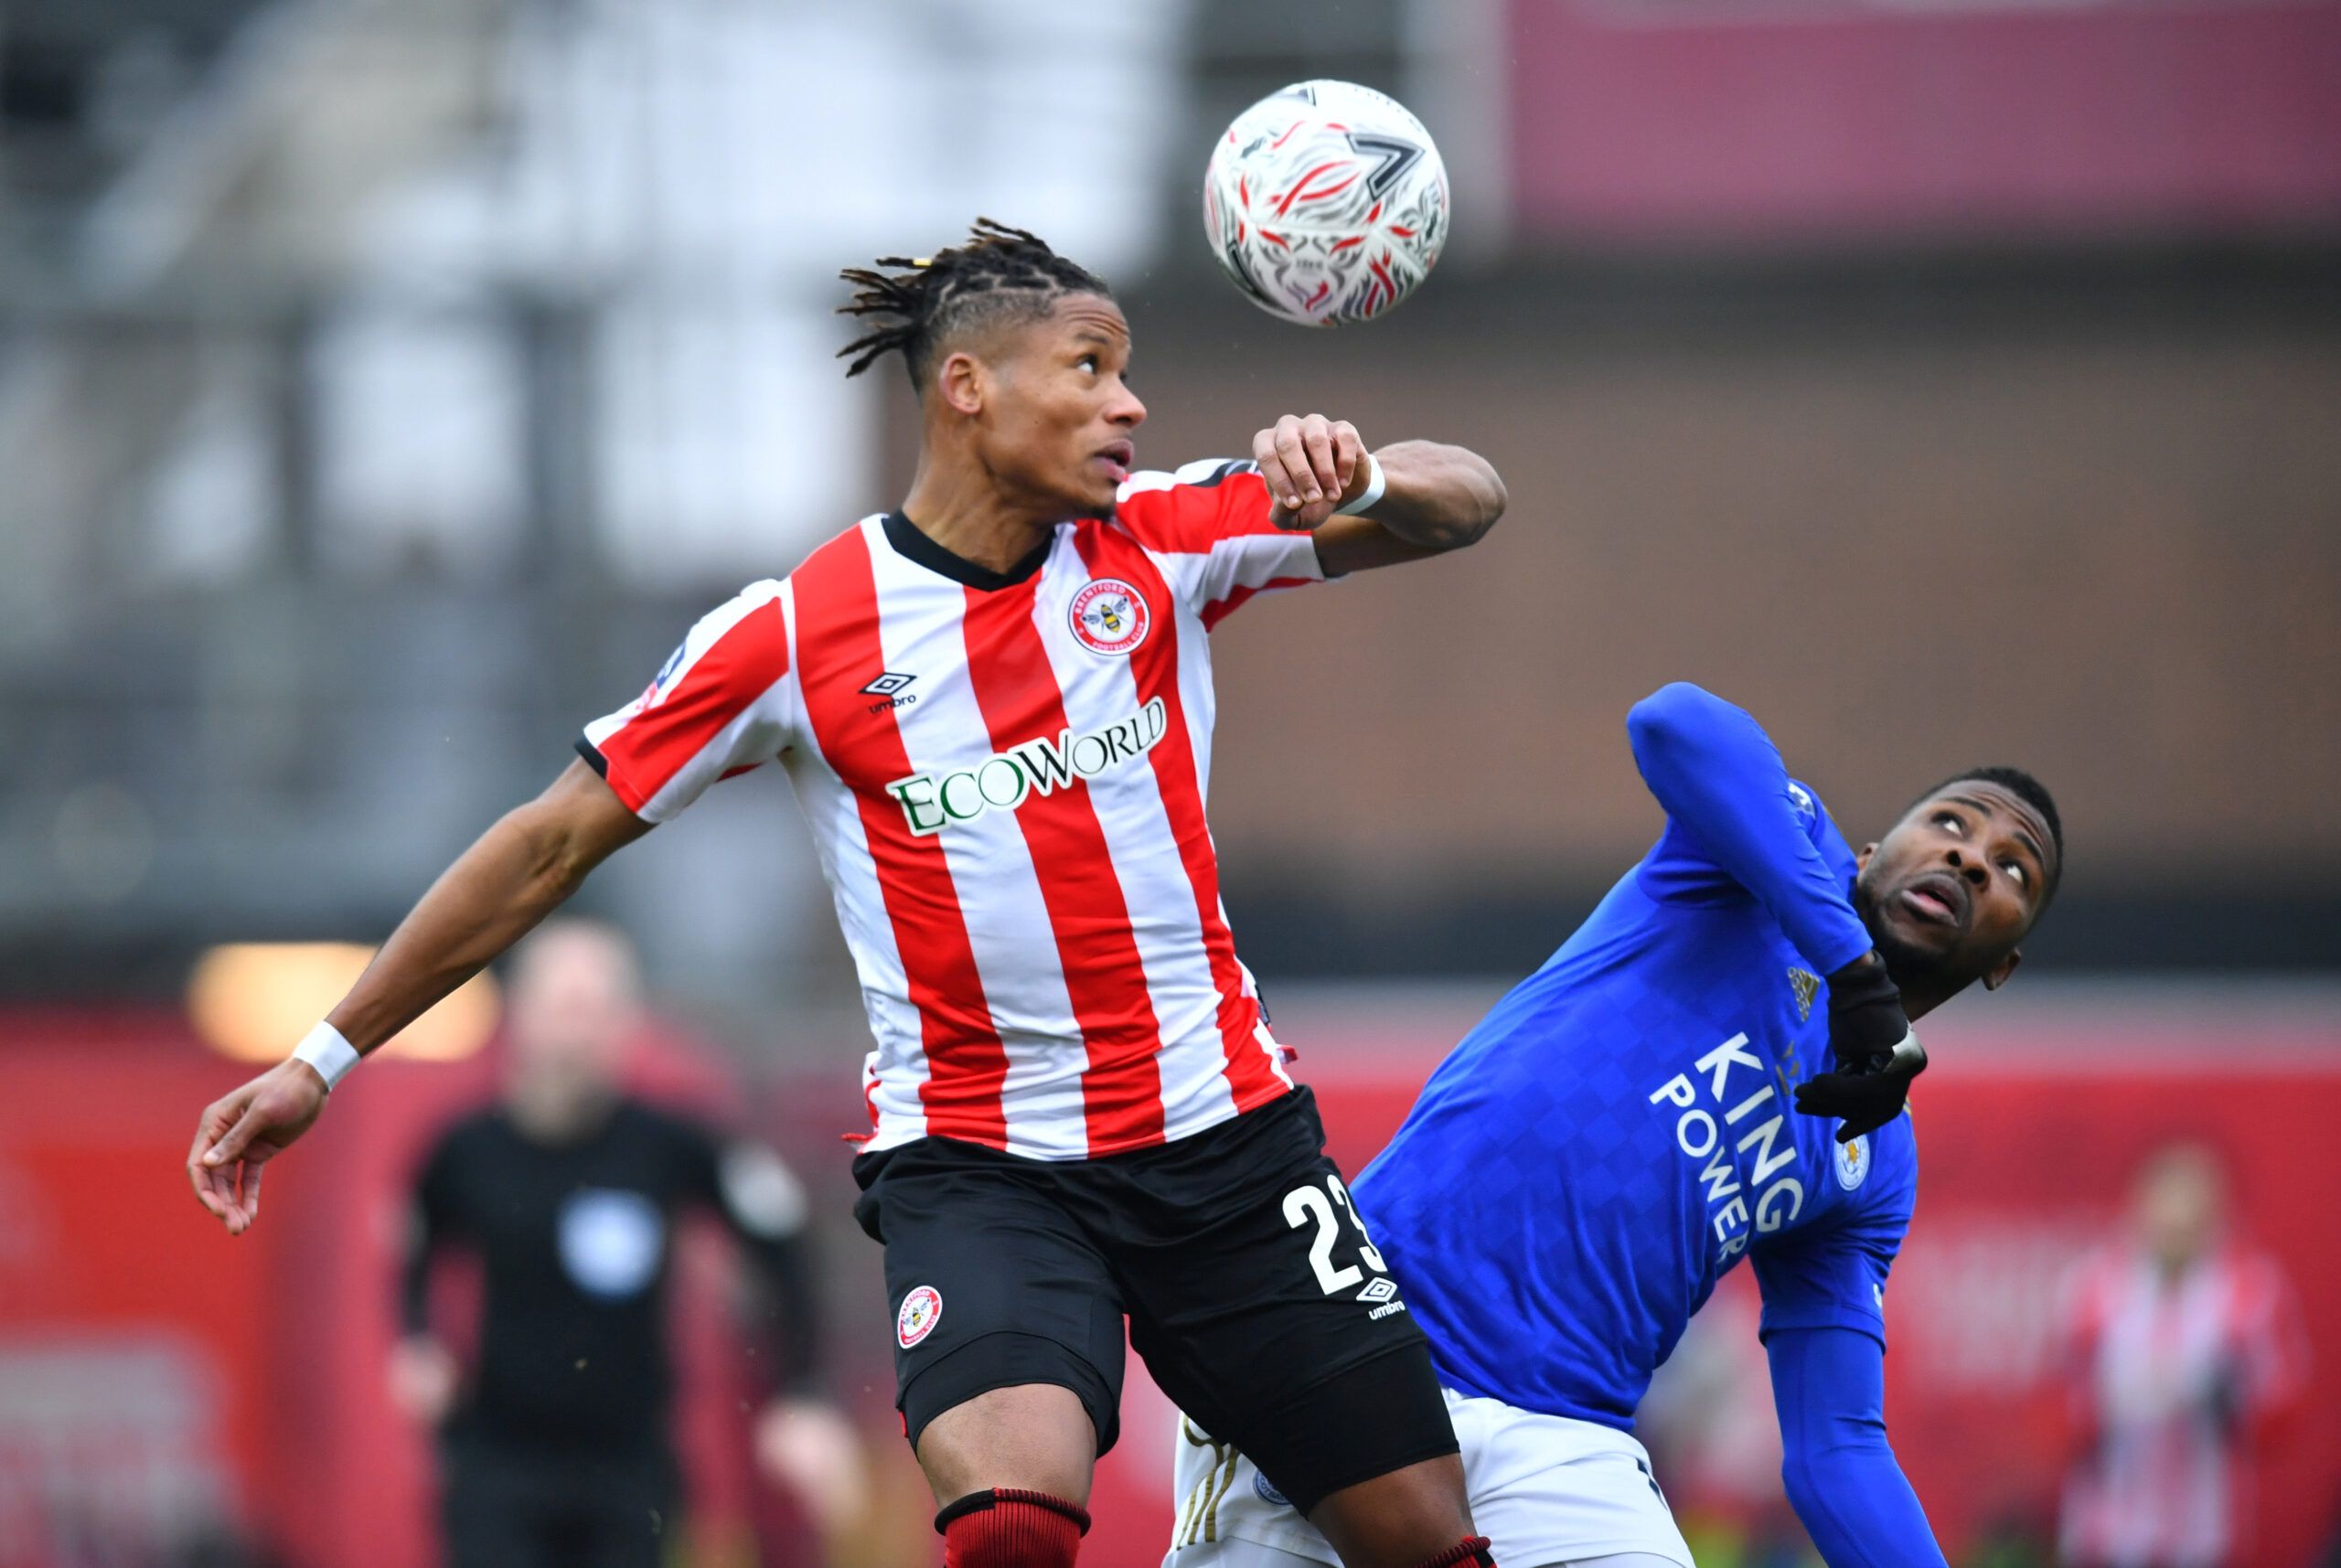 Soccer Football - FA Cup Fourth Round - Brentford v Leicester City - Griffin Park, Brentford, Britain - January 25, 2020  Brentford's Julian Jeanvier in action with Leicester City's Kelechi Iheanacho   REUTERS/Dylan Martinez